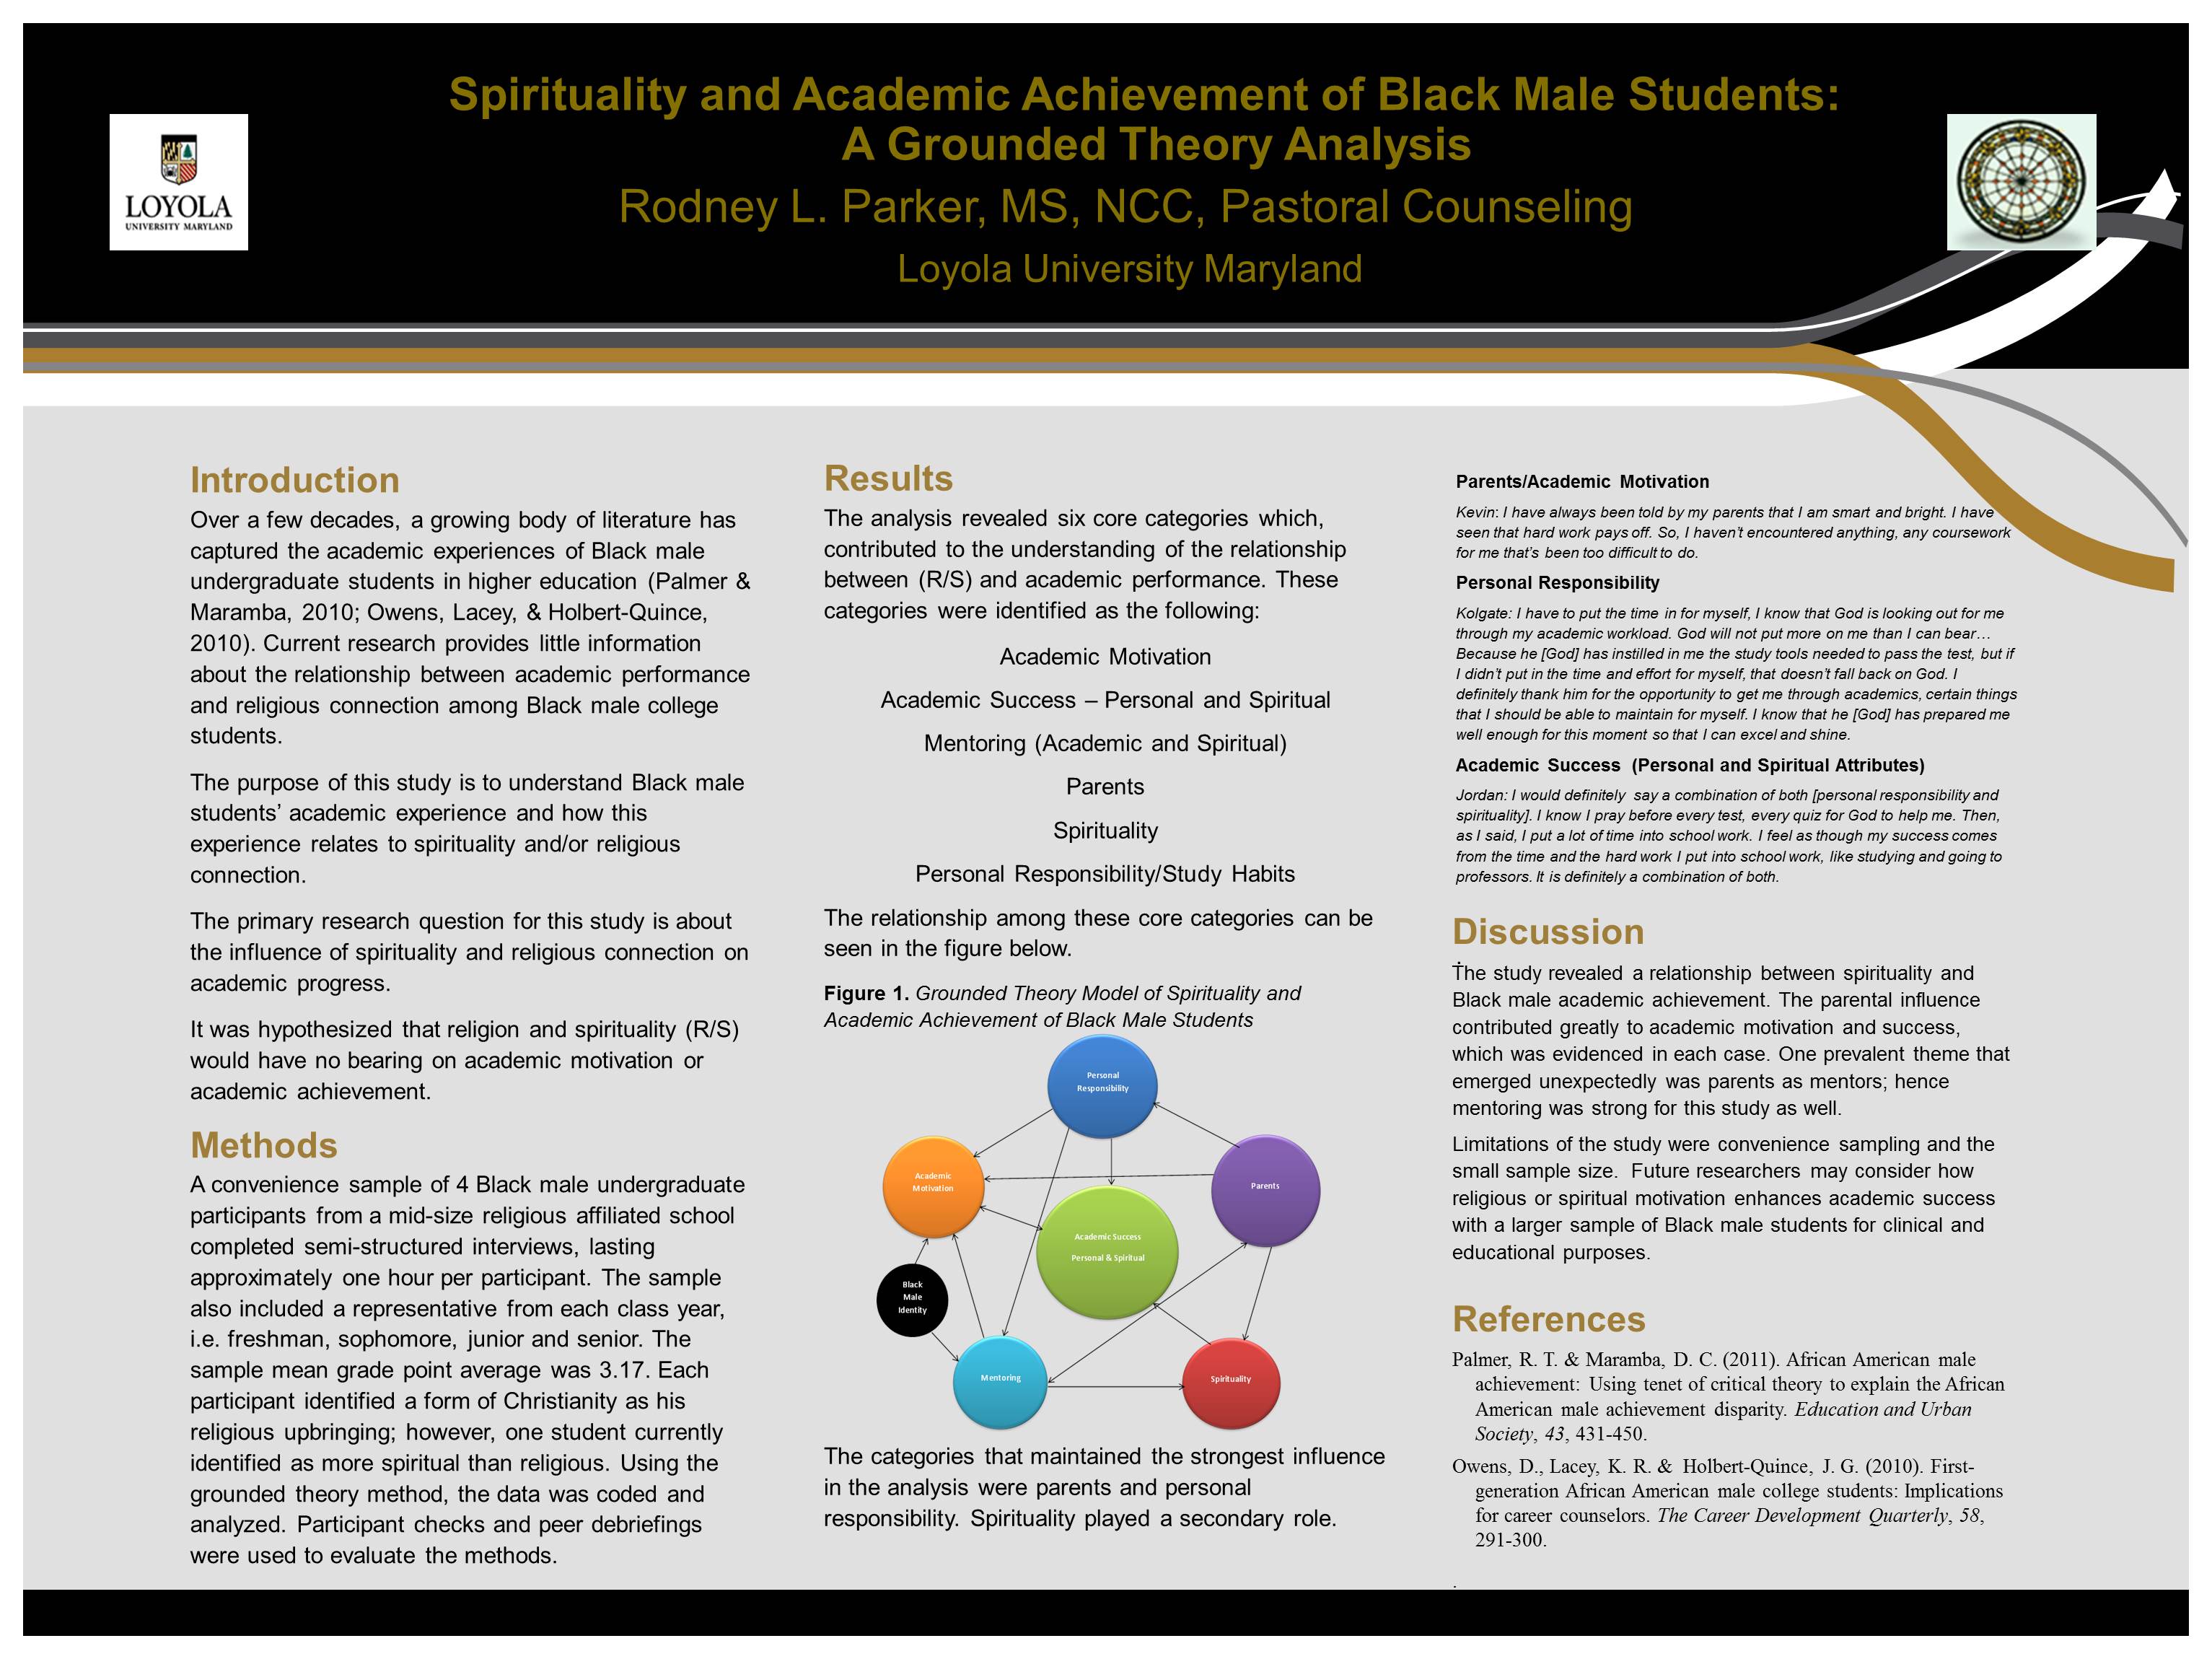 Enlarged poster image: Spirituality and Academic Achievement of Black Male Students: A Grounded Theory Analysis